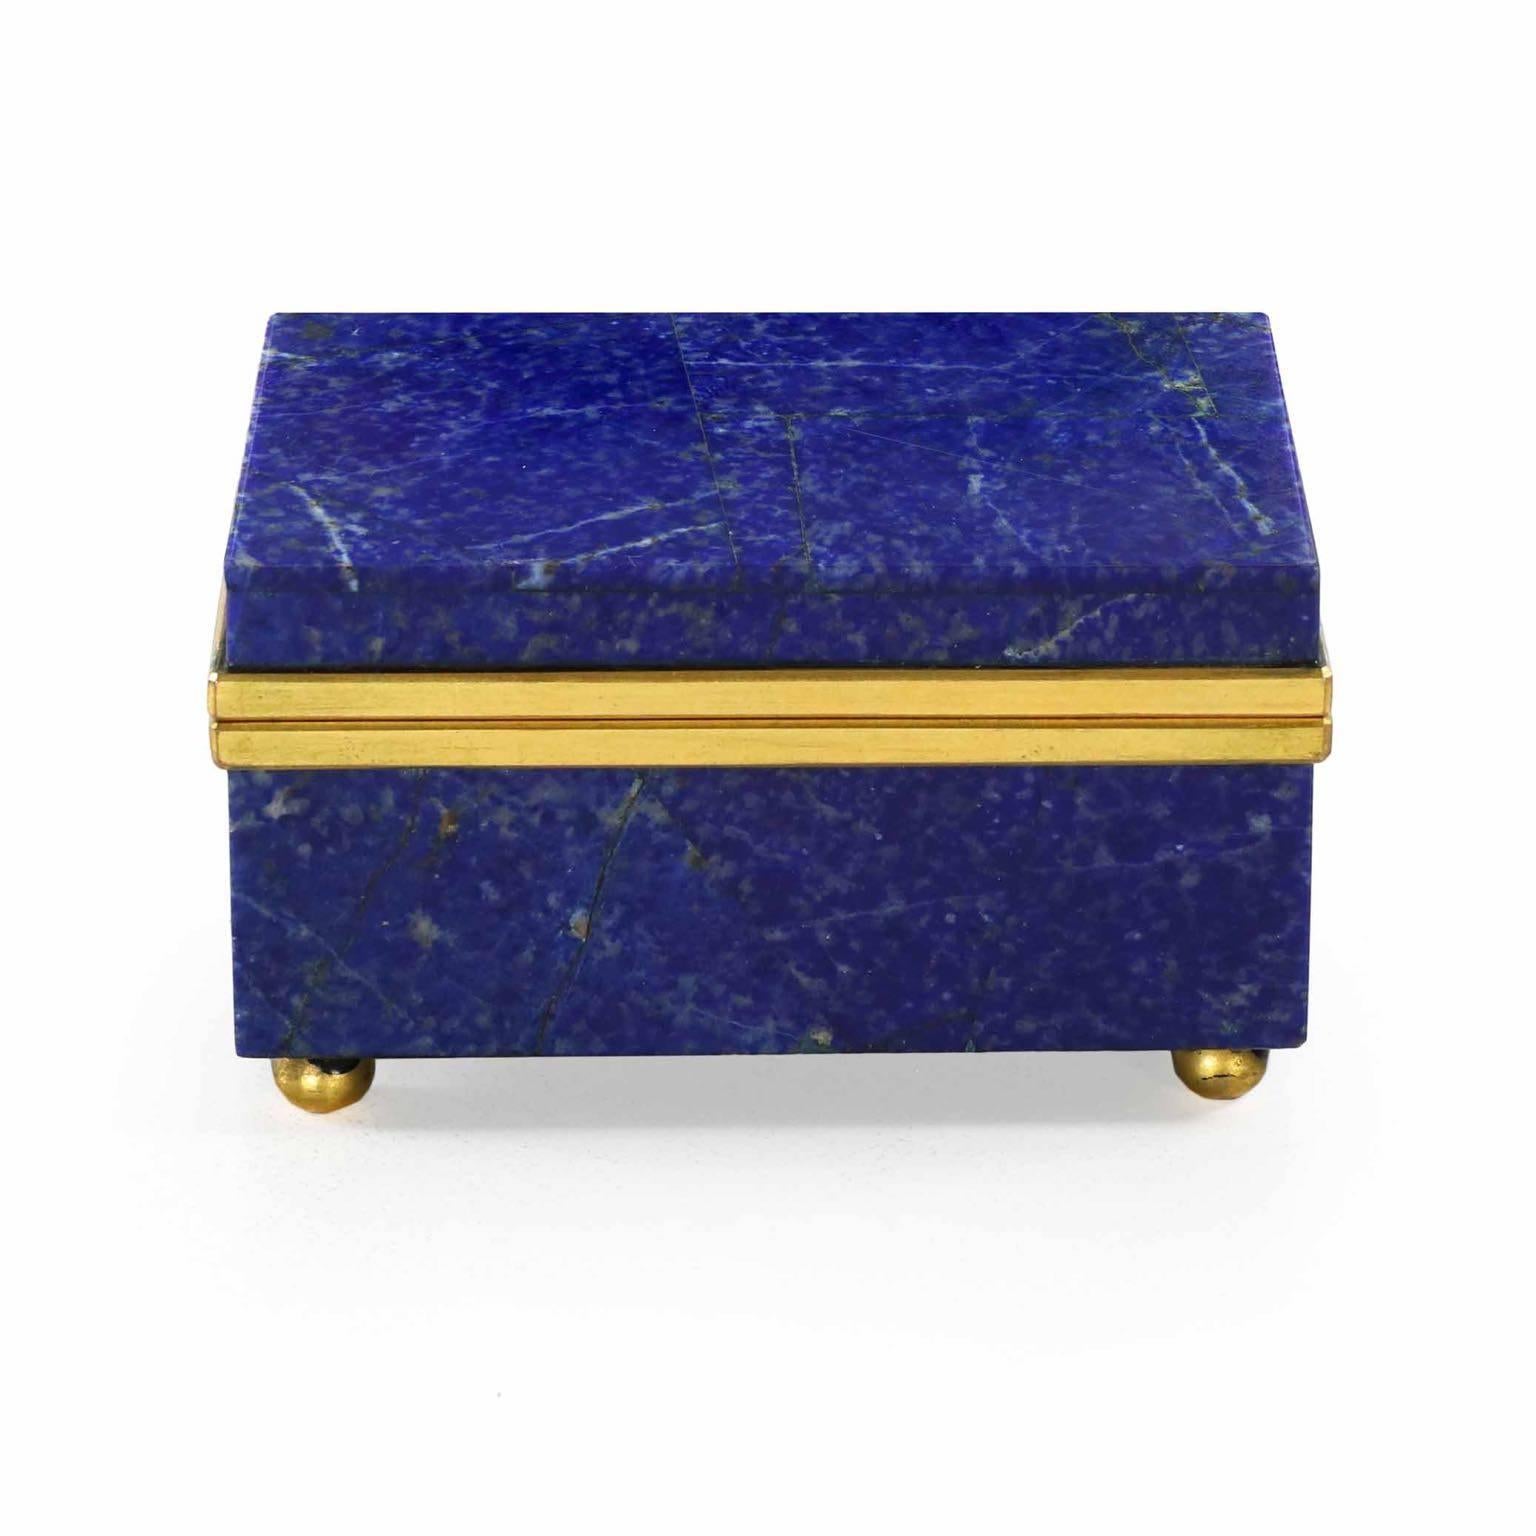 This rare and simply exquisite miniature jewelry box is so rich in surface. Veneered in the exotic Lapis Lazuli stone, the workmanship is beyond excellent - crisp seams and perfect finishing characterize all primary surfaces, the lid opening on